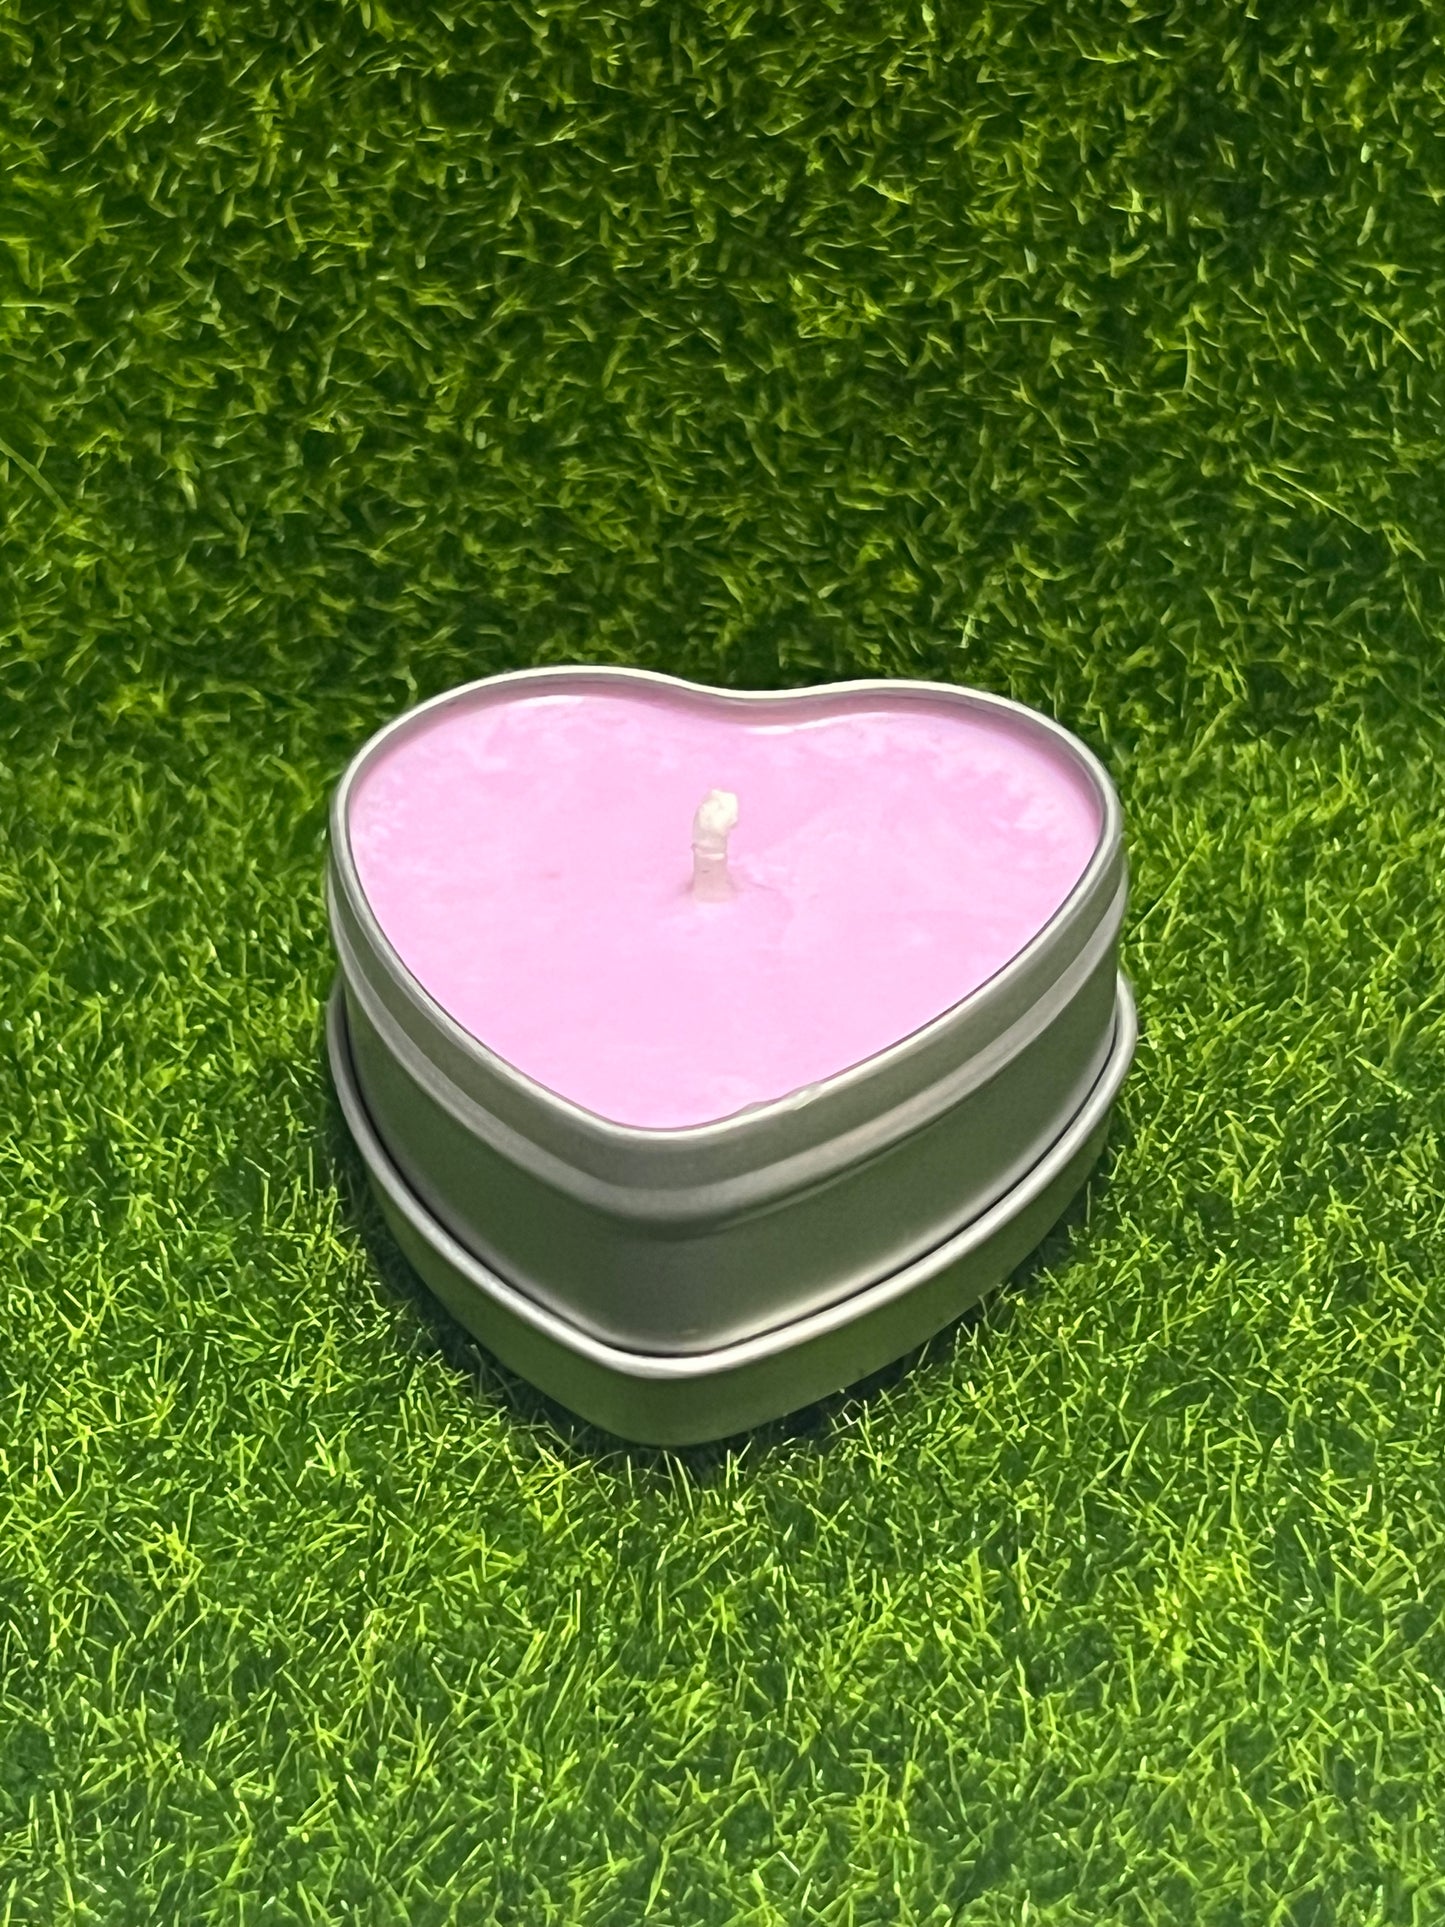 Pure Soy Wax Candles / Handmade Candles / Soy Candles / Heart Candle / Tin Candle / Gift Candle / Homedecor